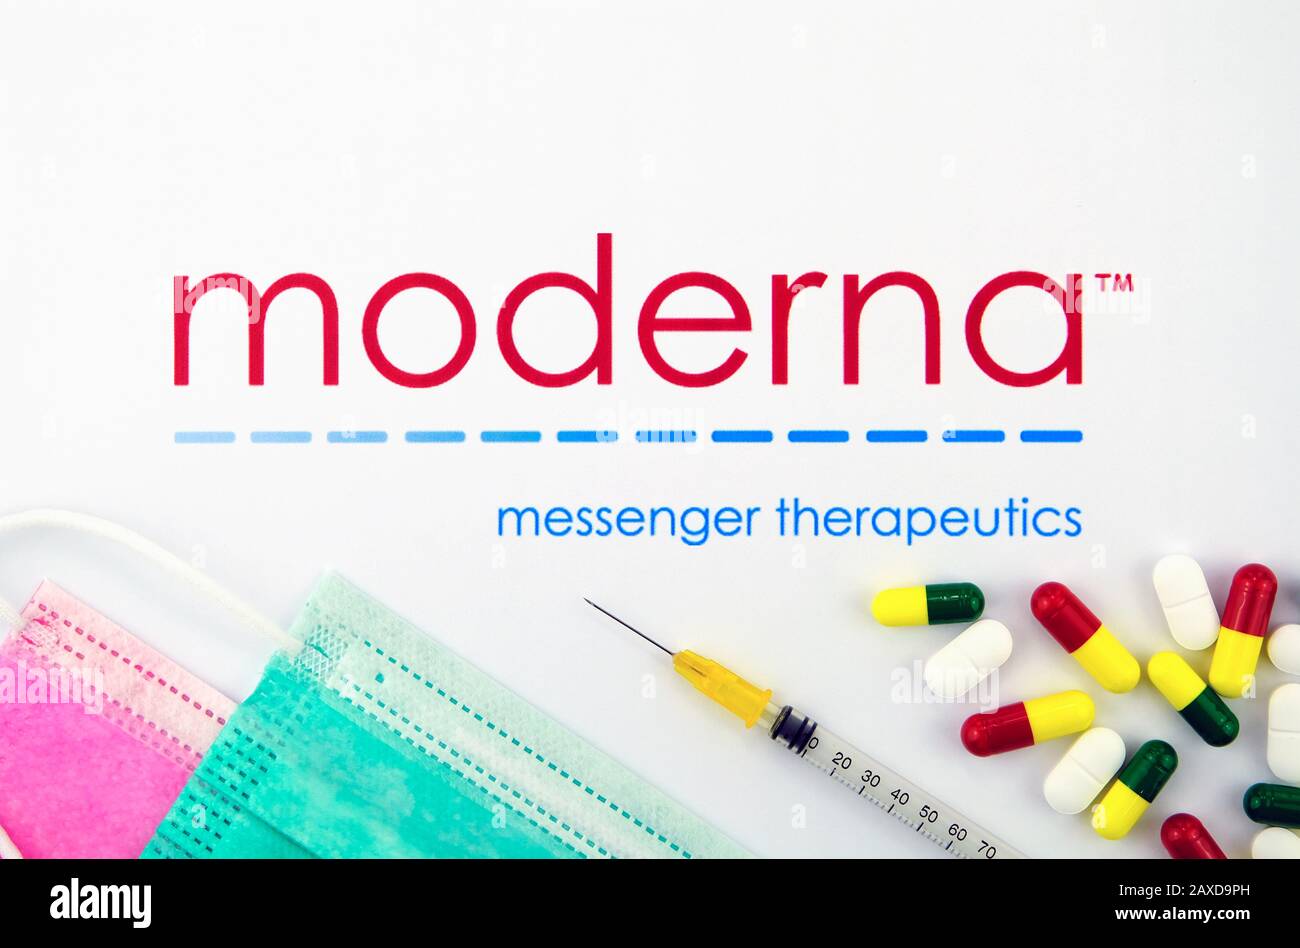 Moderna medical compamy logo seen on the brochure with the viral masks, syringe and pills. Photo concept. Stock Photo